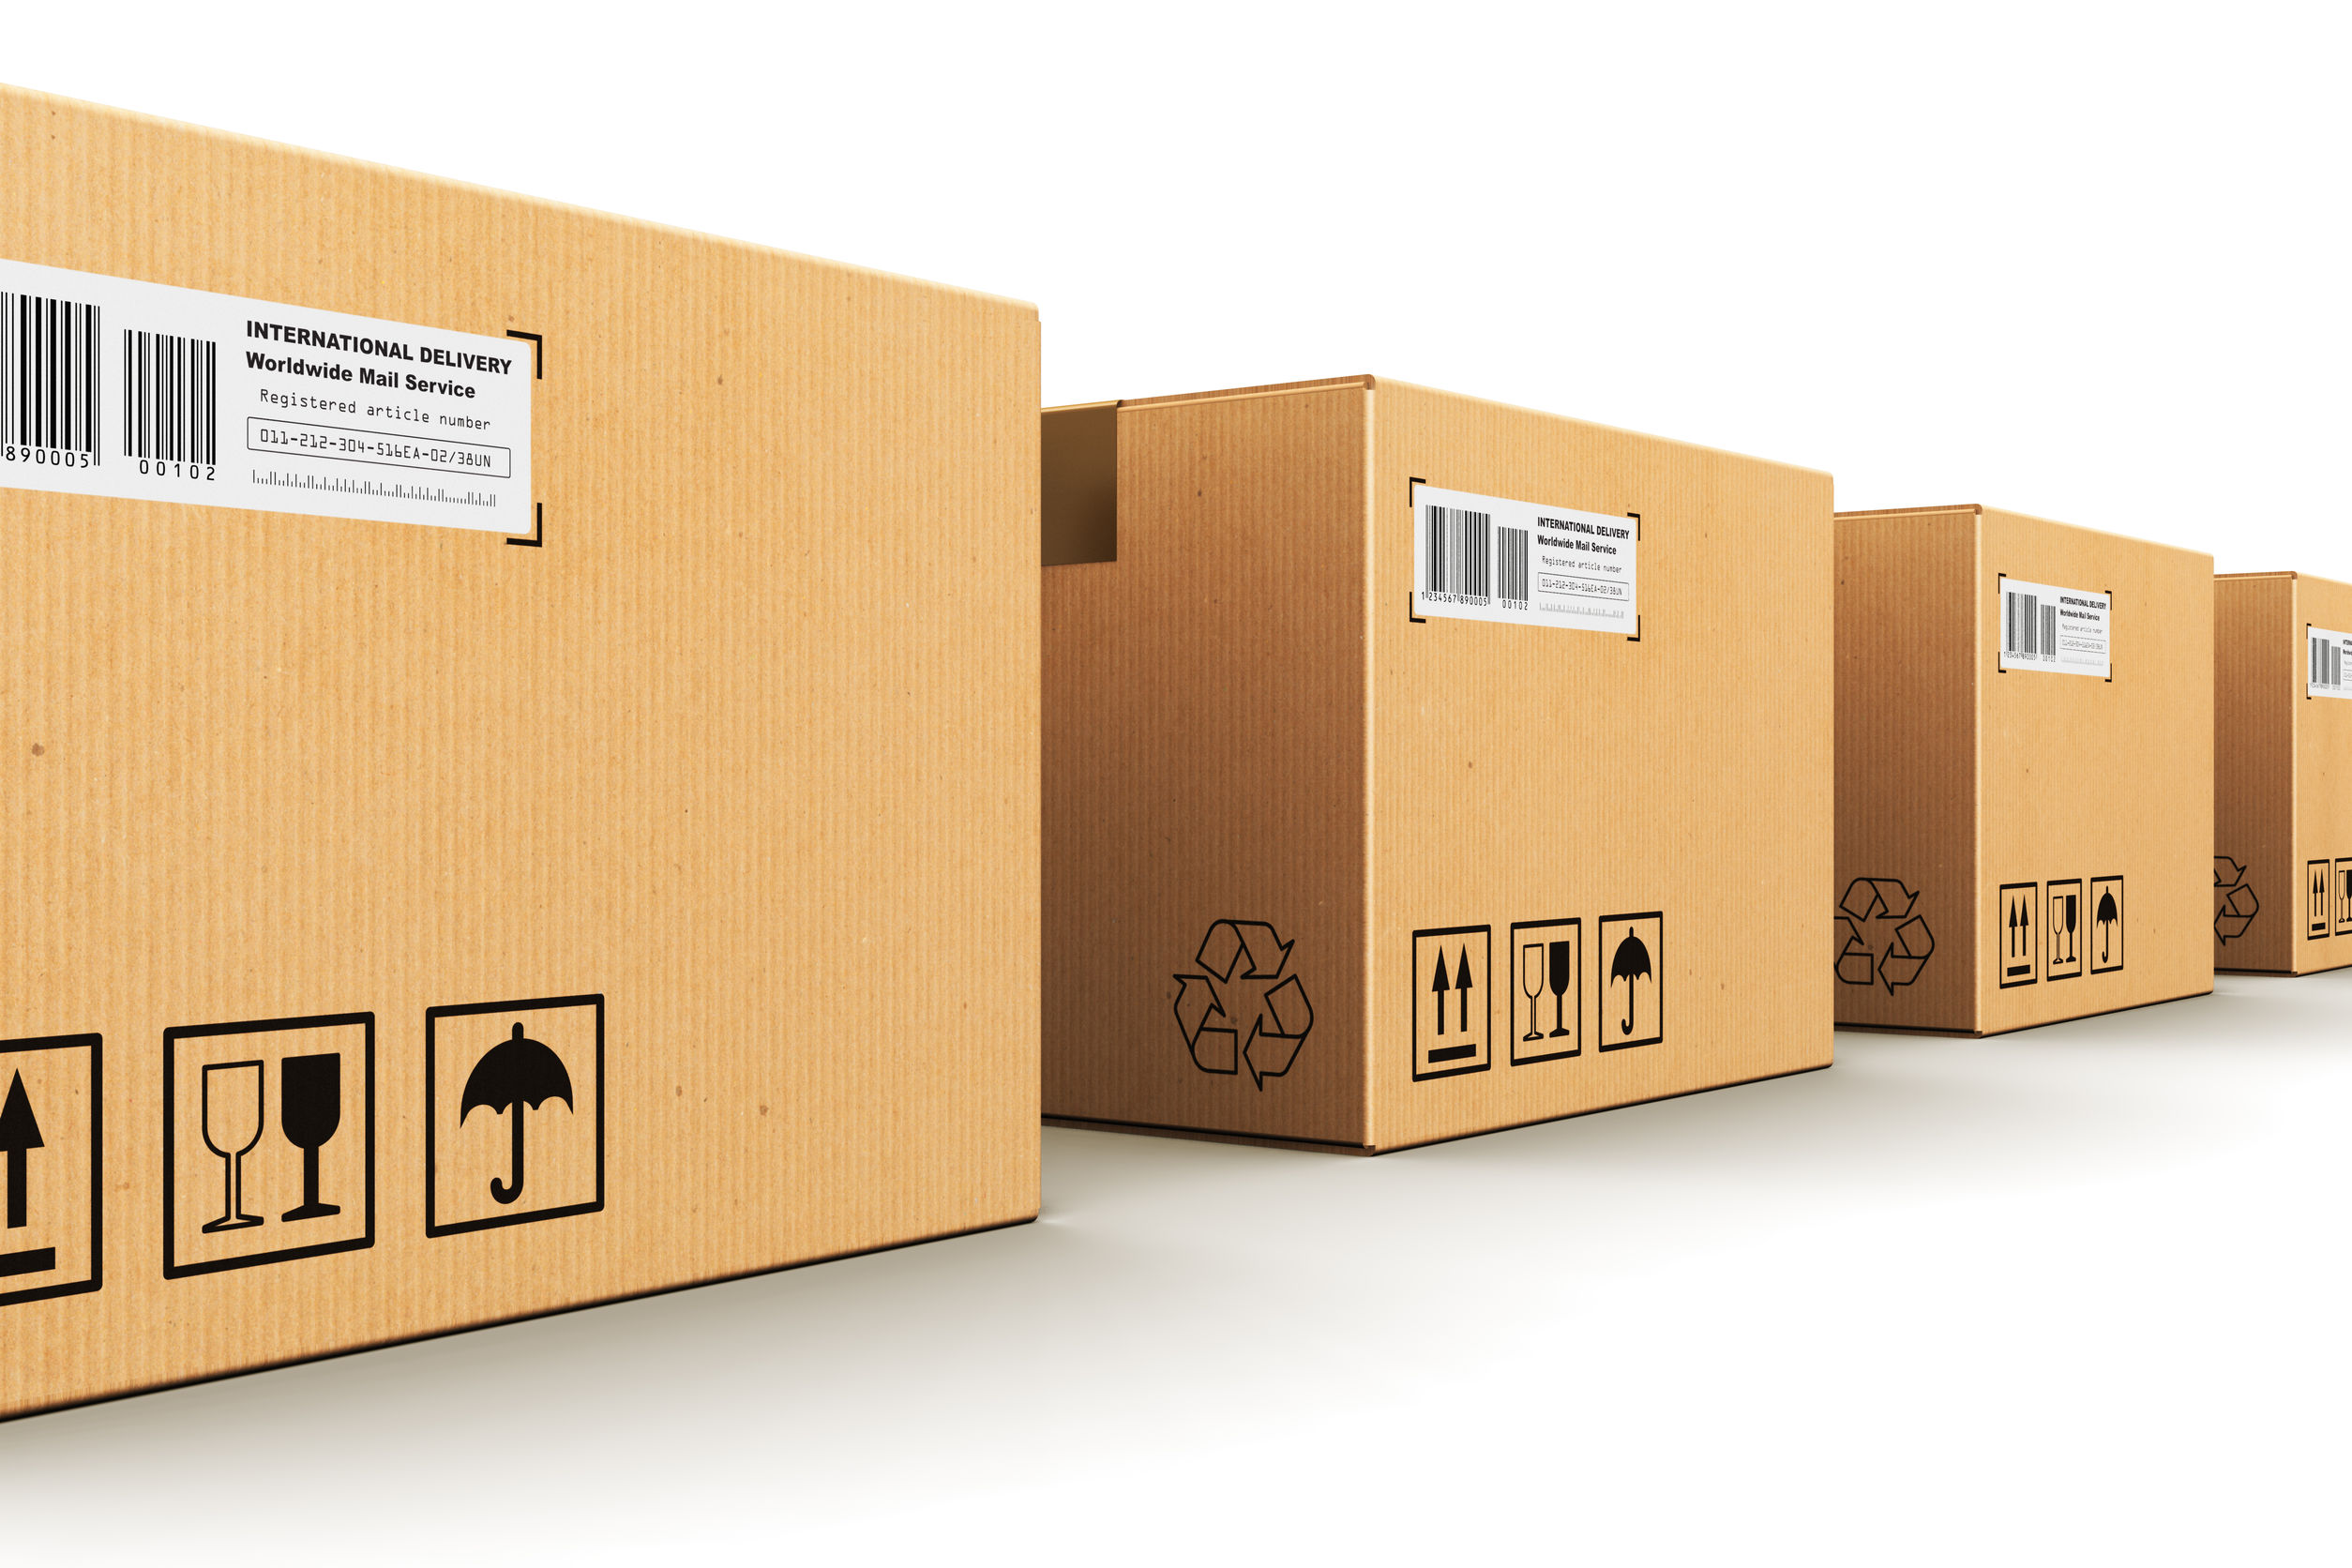 Warehousing and Distribution: 3 Signs of Poor Service Levels